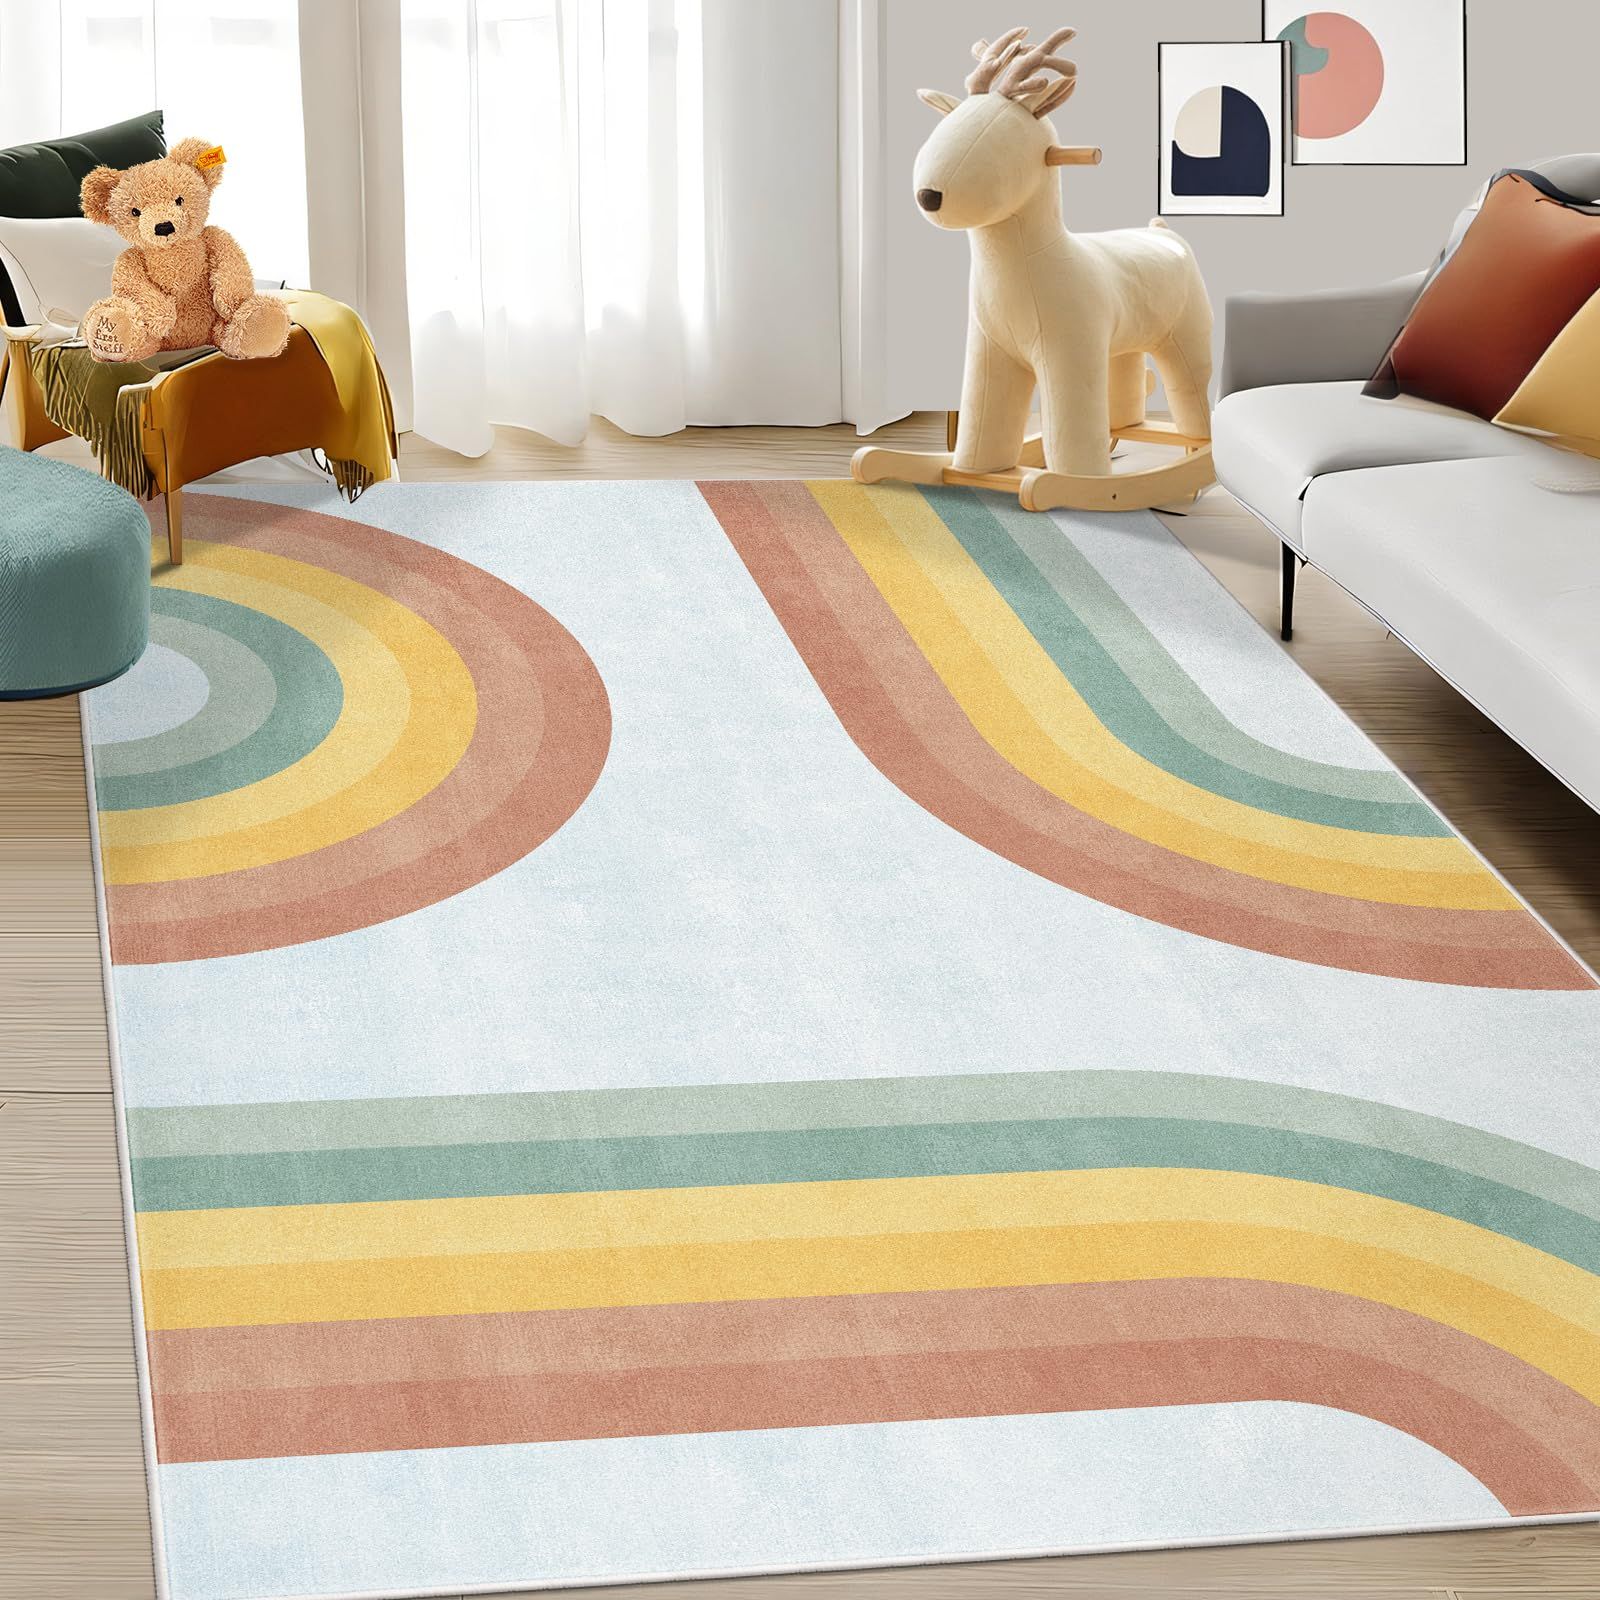 The Importance of Kids Playroom Area Rugs